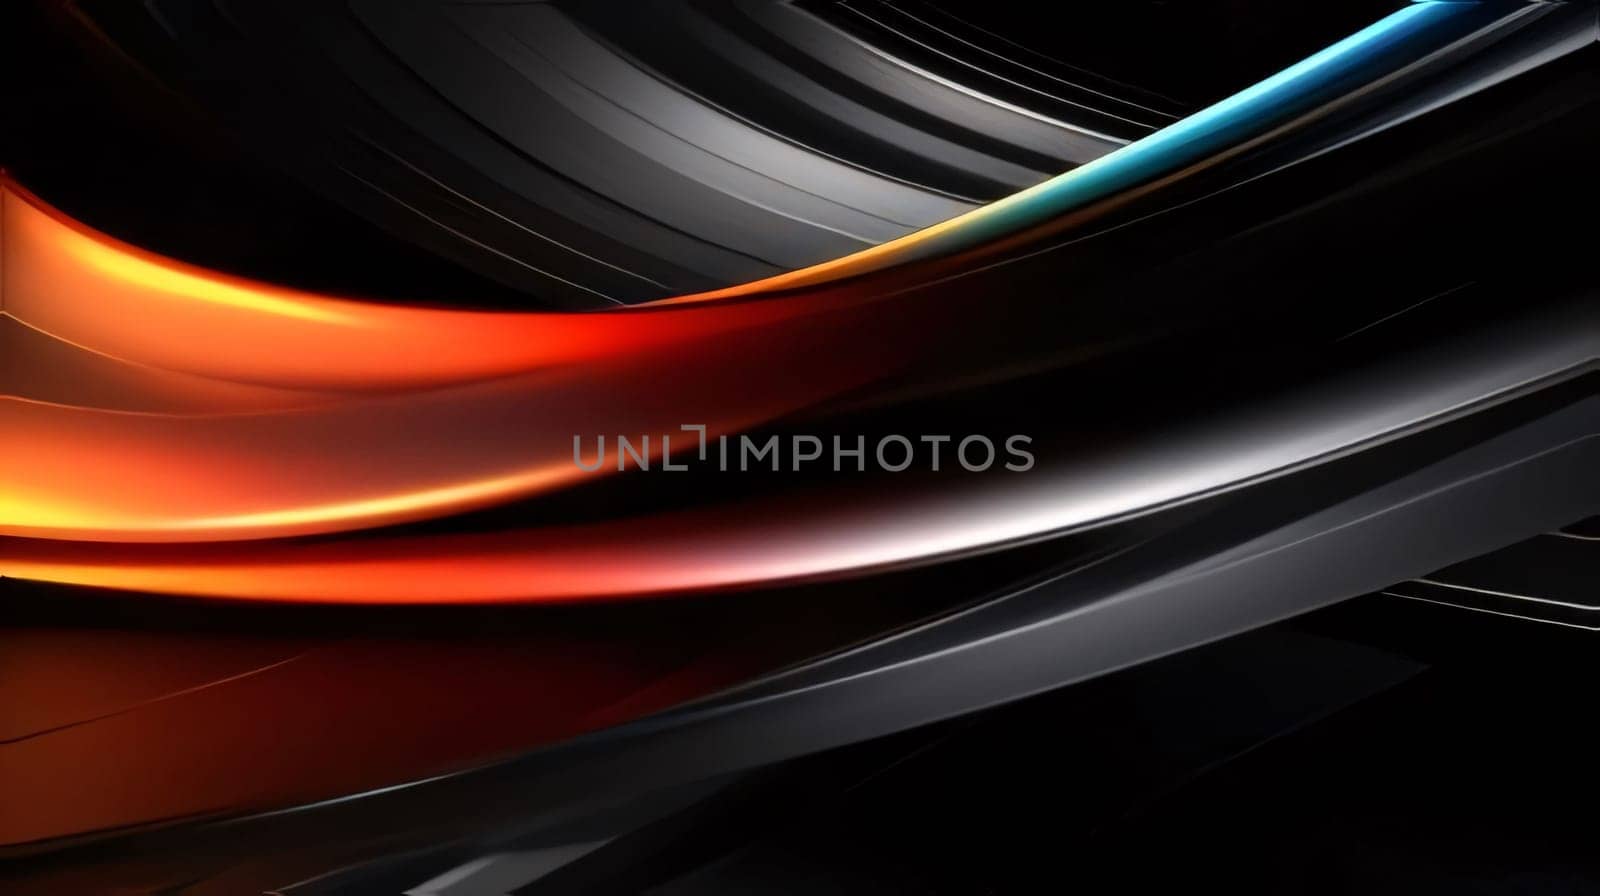 Abstract background design: 3d rendering of abstract background with smooth wavy lines in black and orange